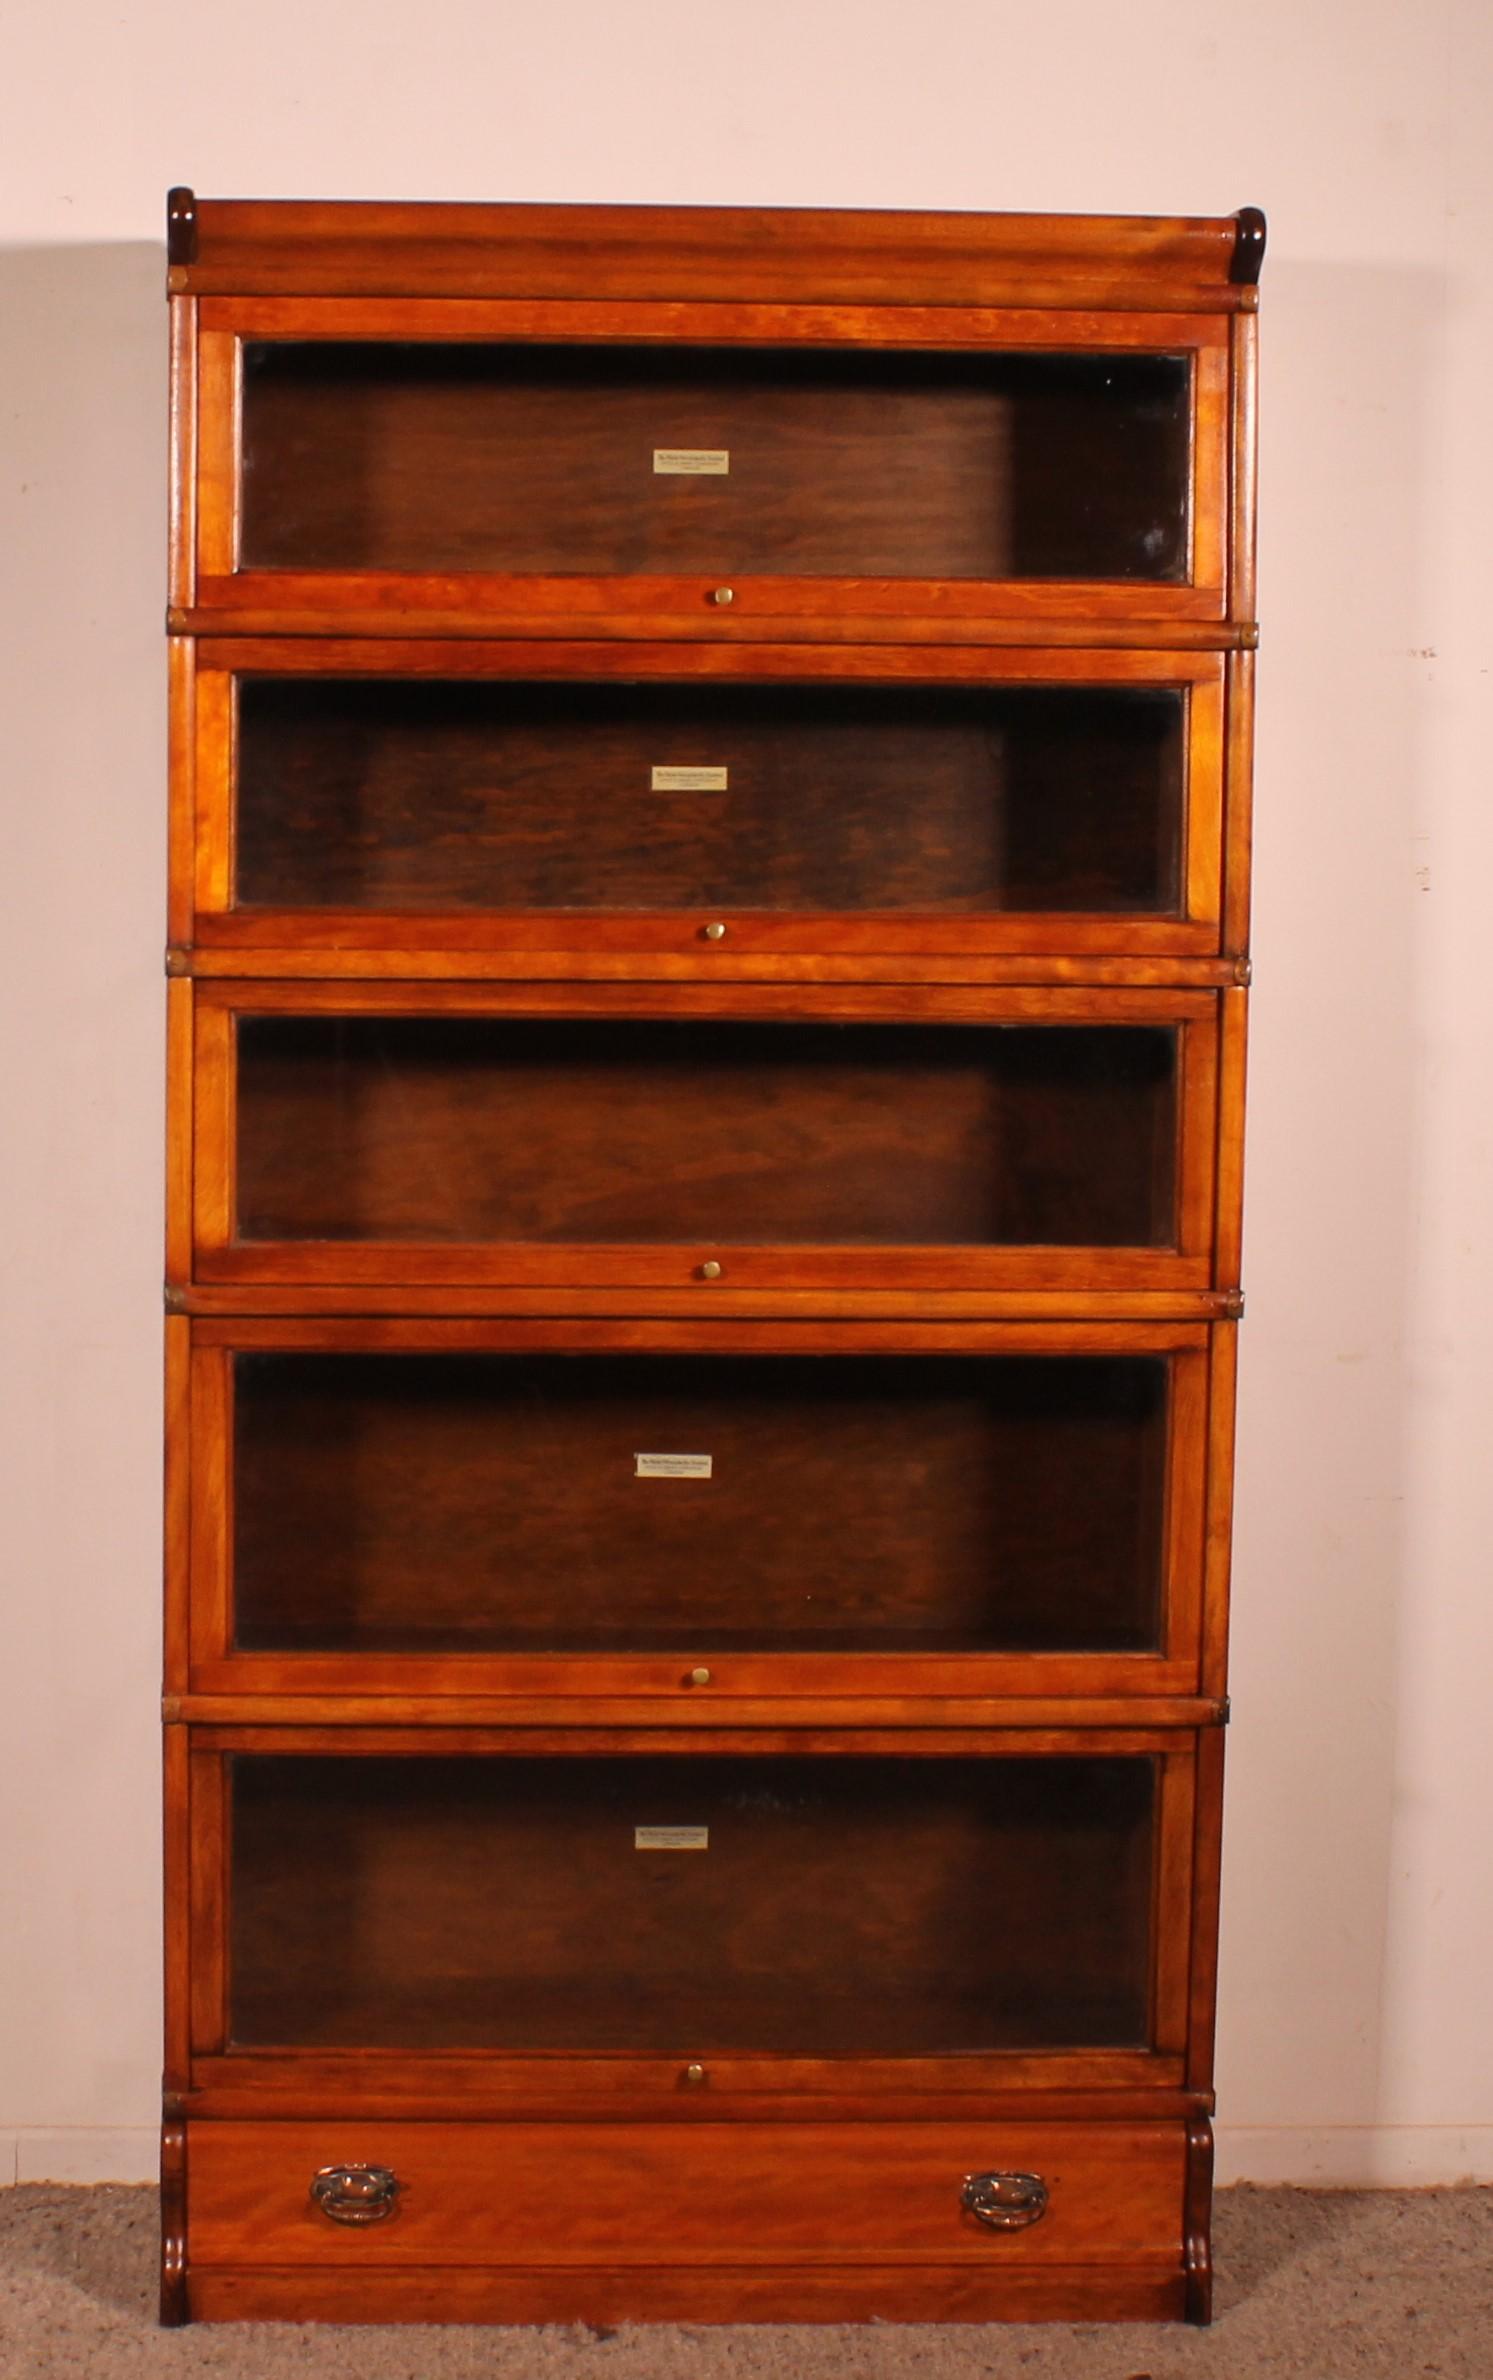 Elegant Globe Wernicke London bookcase in fruit wood from the end of the 19th century-early 20th century from England which has 5 elements and a drawer at the bottom. 

The bookcase is made of fruit wood which is rare. Our first in three